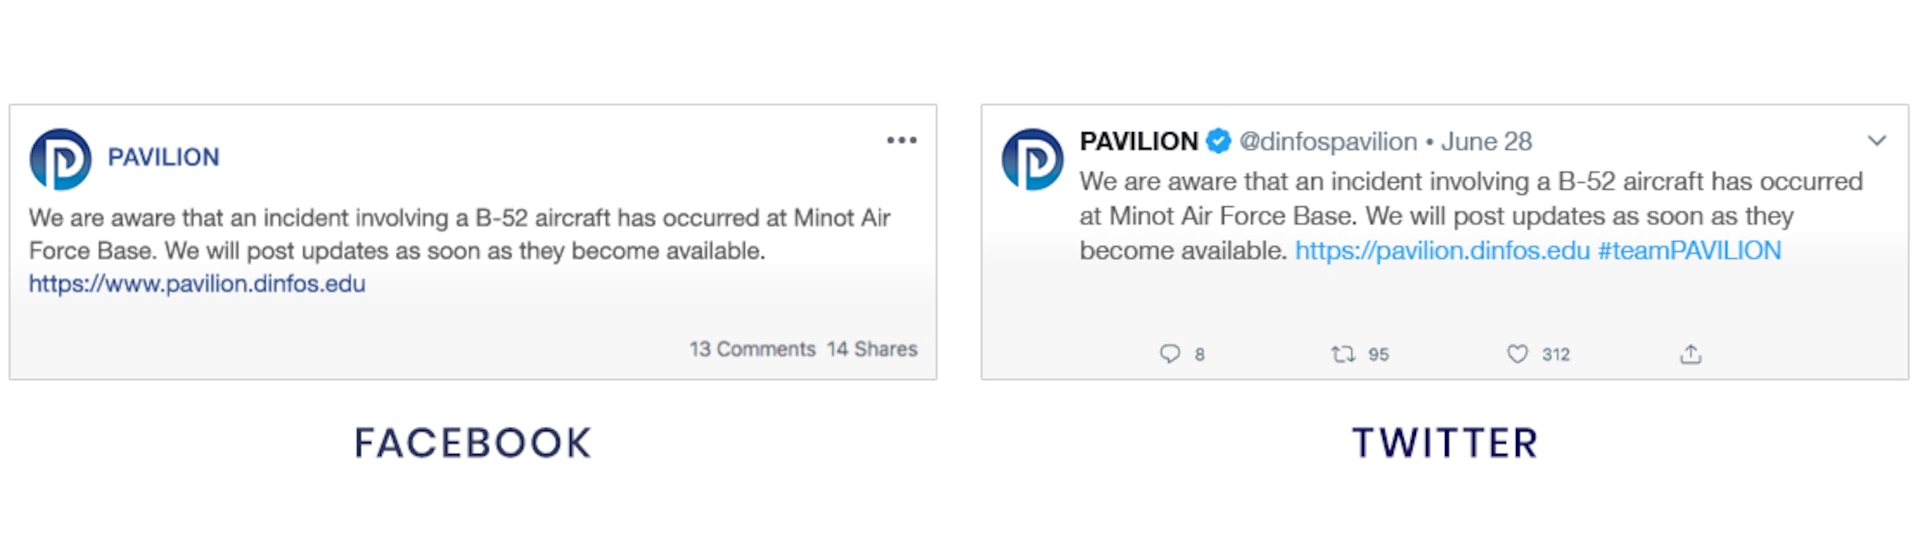 Image is of two different 'fake' social media posts side-by-side. Image shows example initial post to Facebook and example Twitter post side-by-side.